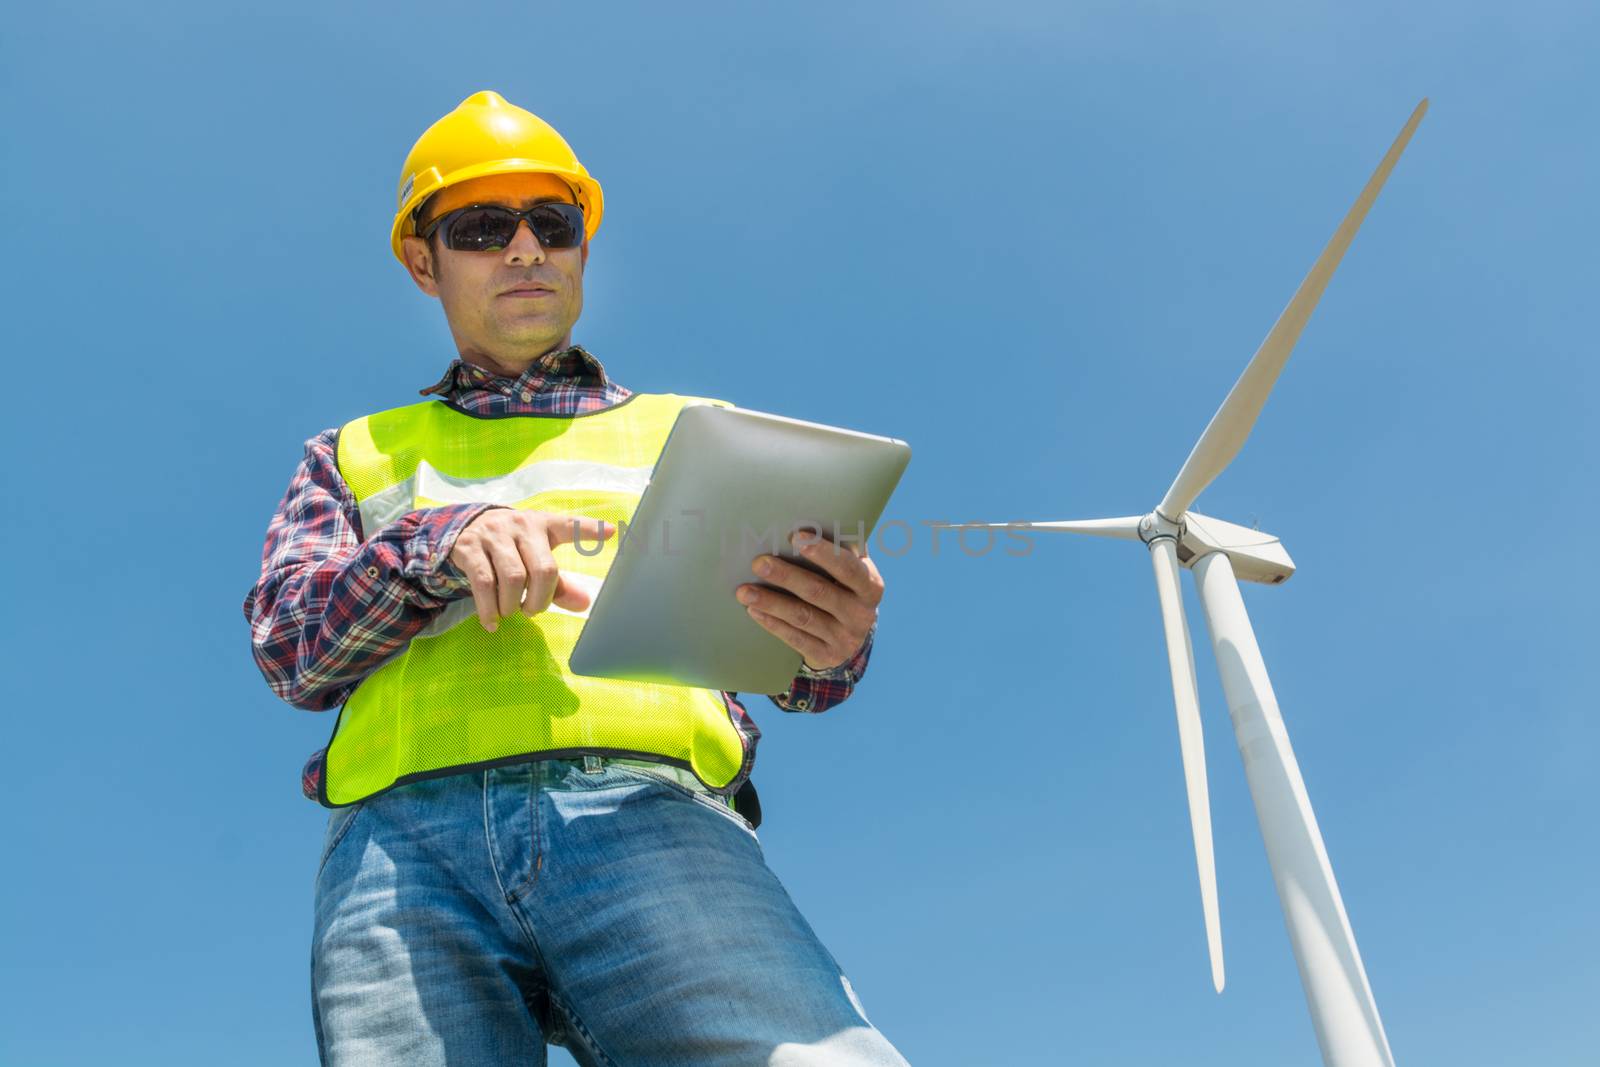 Electric Engineer use Digital Wireless Tablet Device with Wind turbine power Generator Tower Background as Green energy or Renewable Energy Technology Project Development Concept.